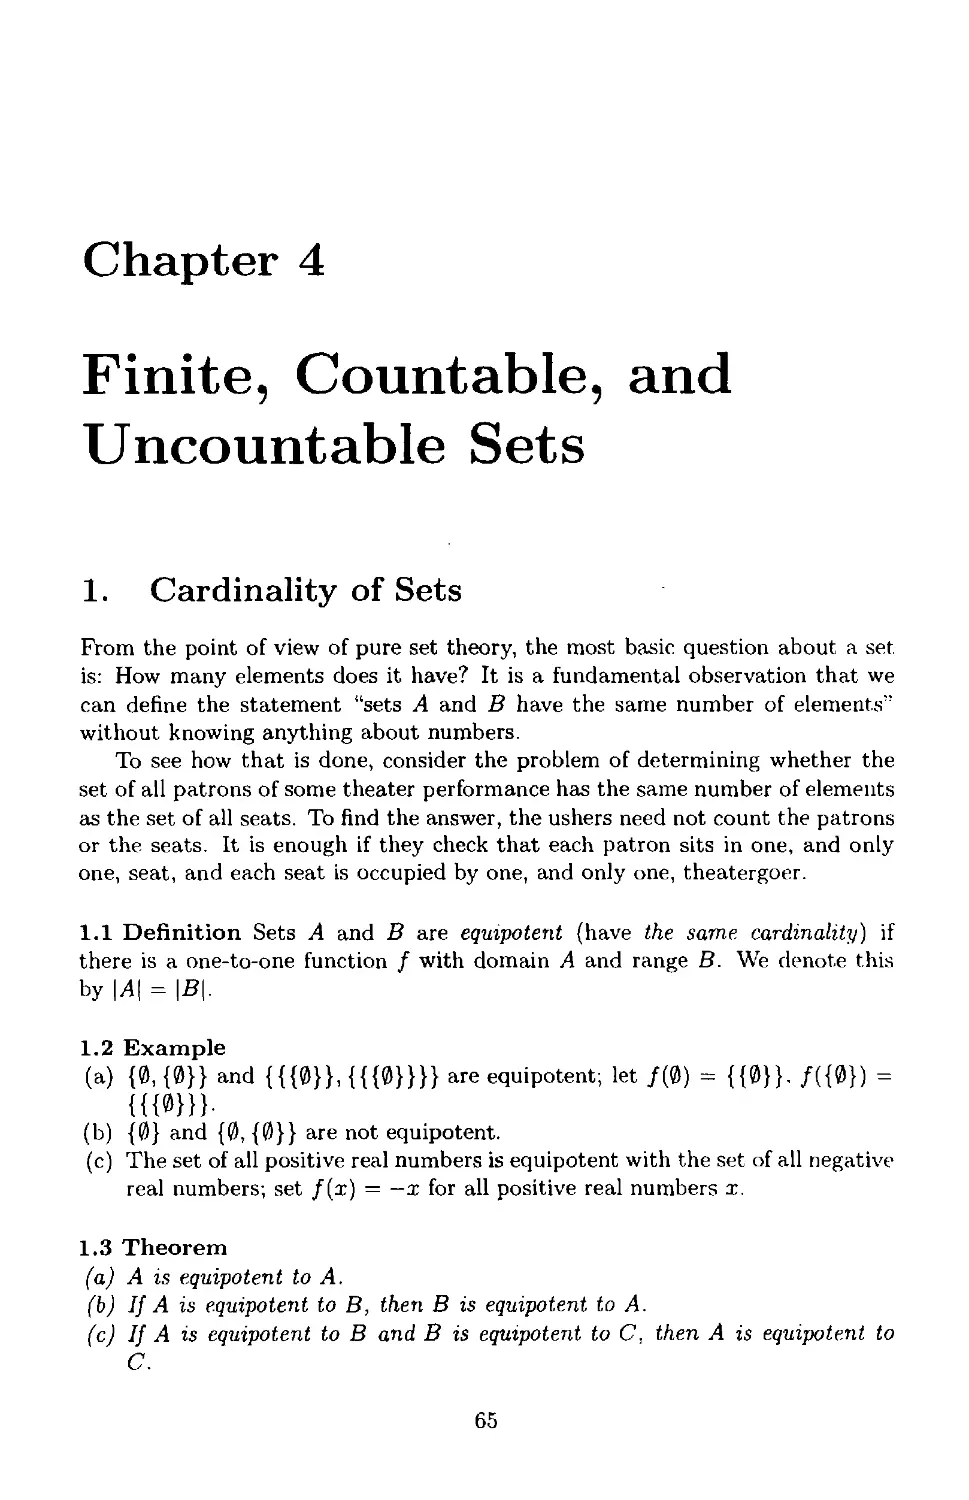 Chapter 4 Finite, Countable, and Uncountable Sets